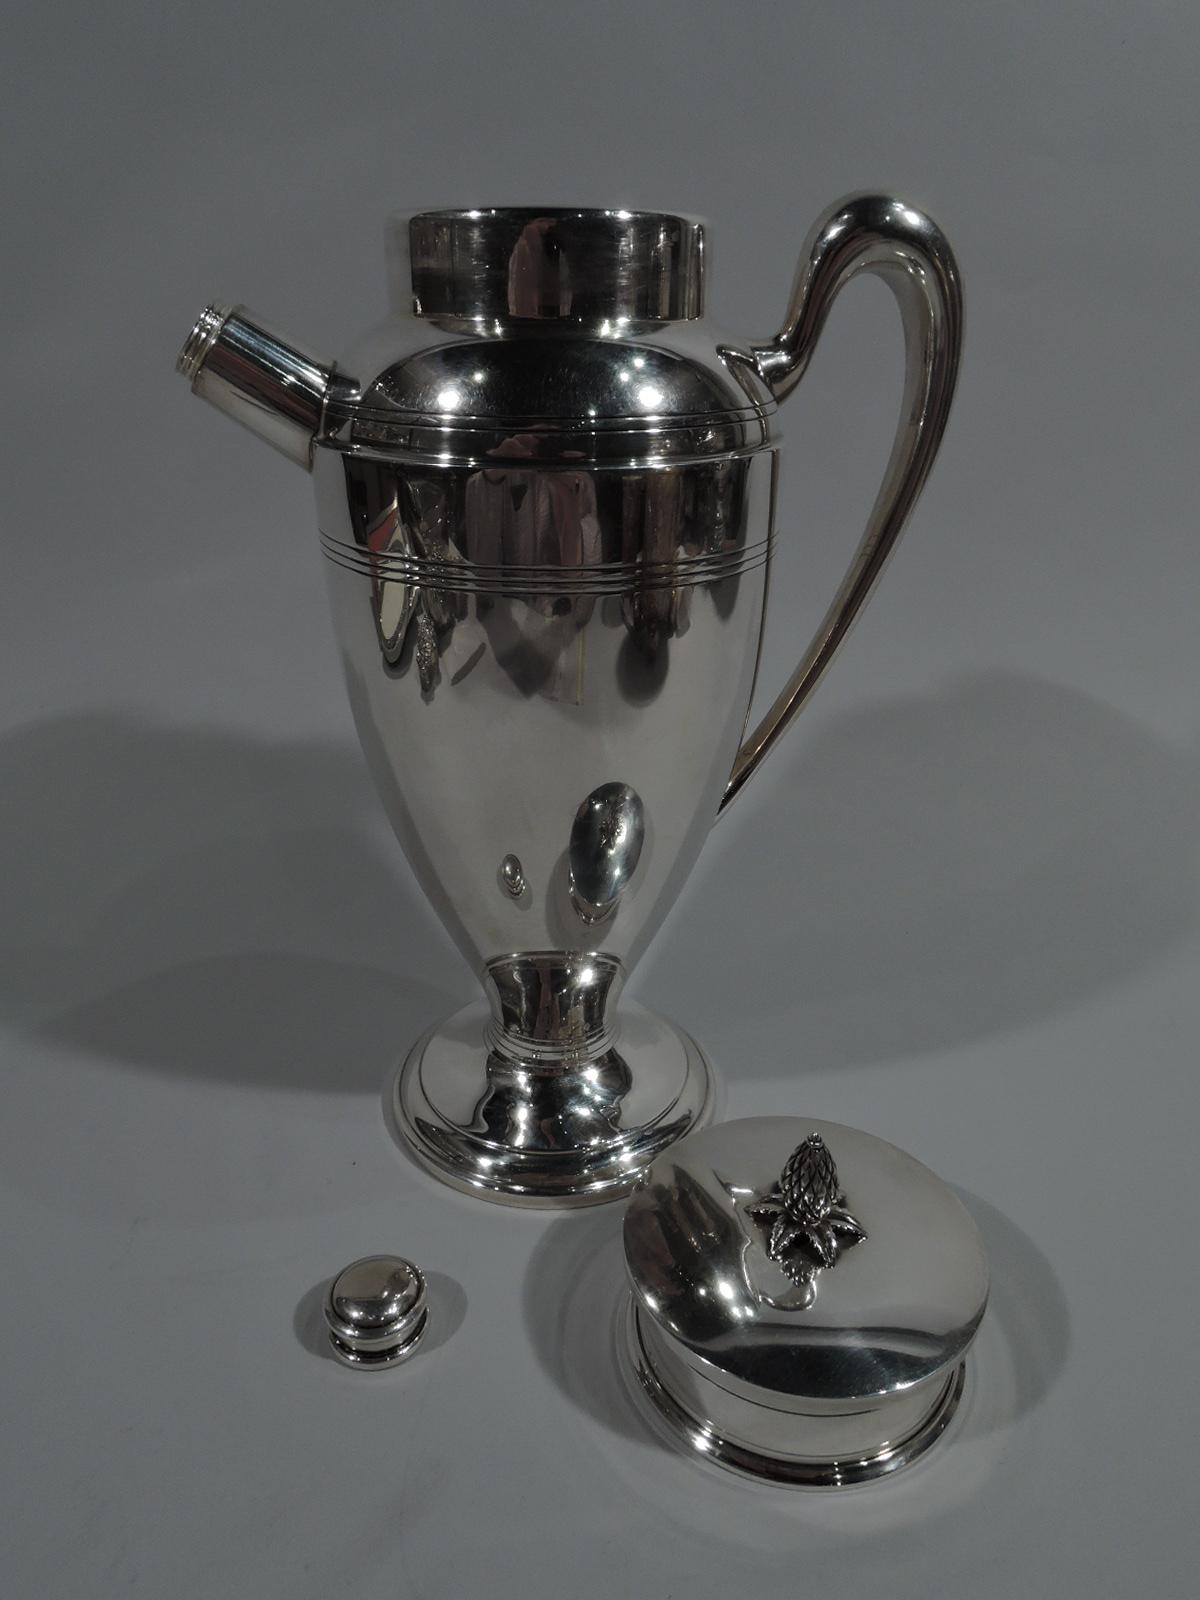 Art Deco sterling silver cocktail shaker. Made by Redlich in New York, ca 1925. Ovoid body, stepped and domed foot, high-looping scroll handle, and straight and stubby spout with built-in strainer and threaded cap. Short neck with flat cover